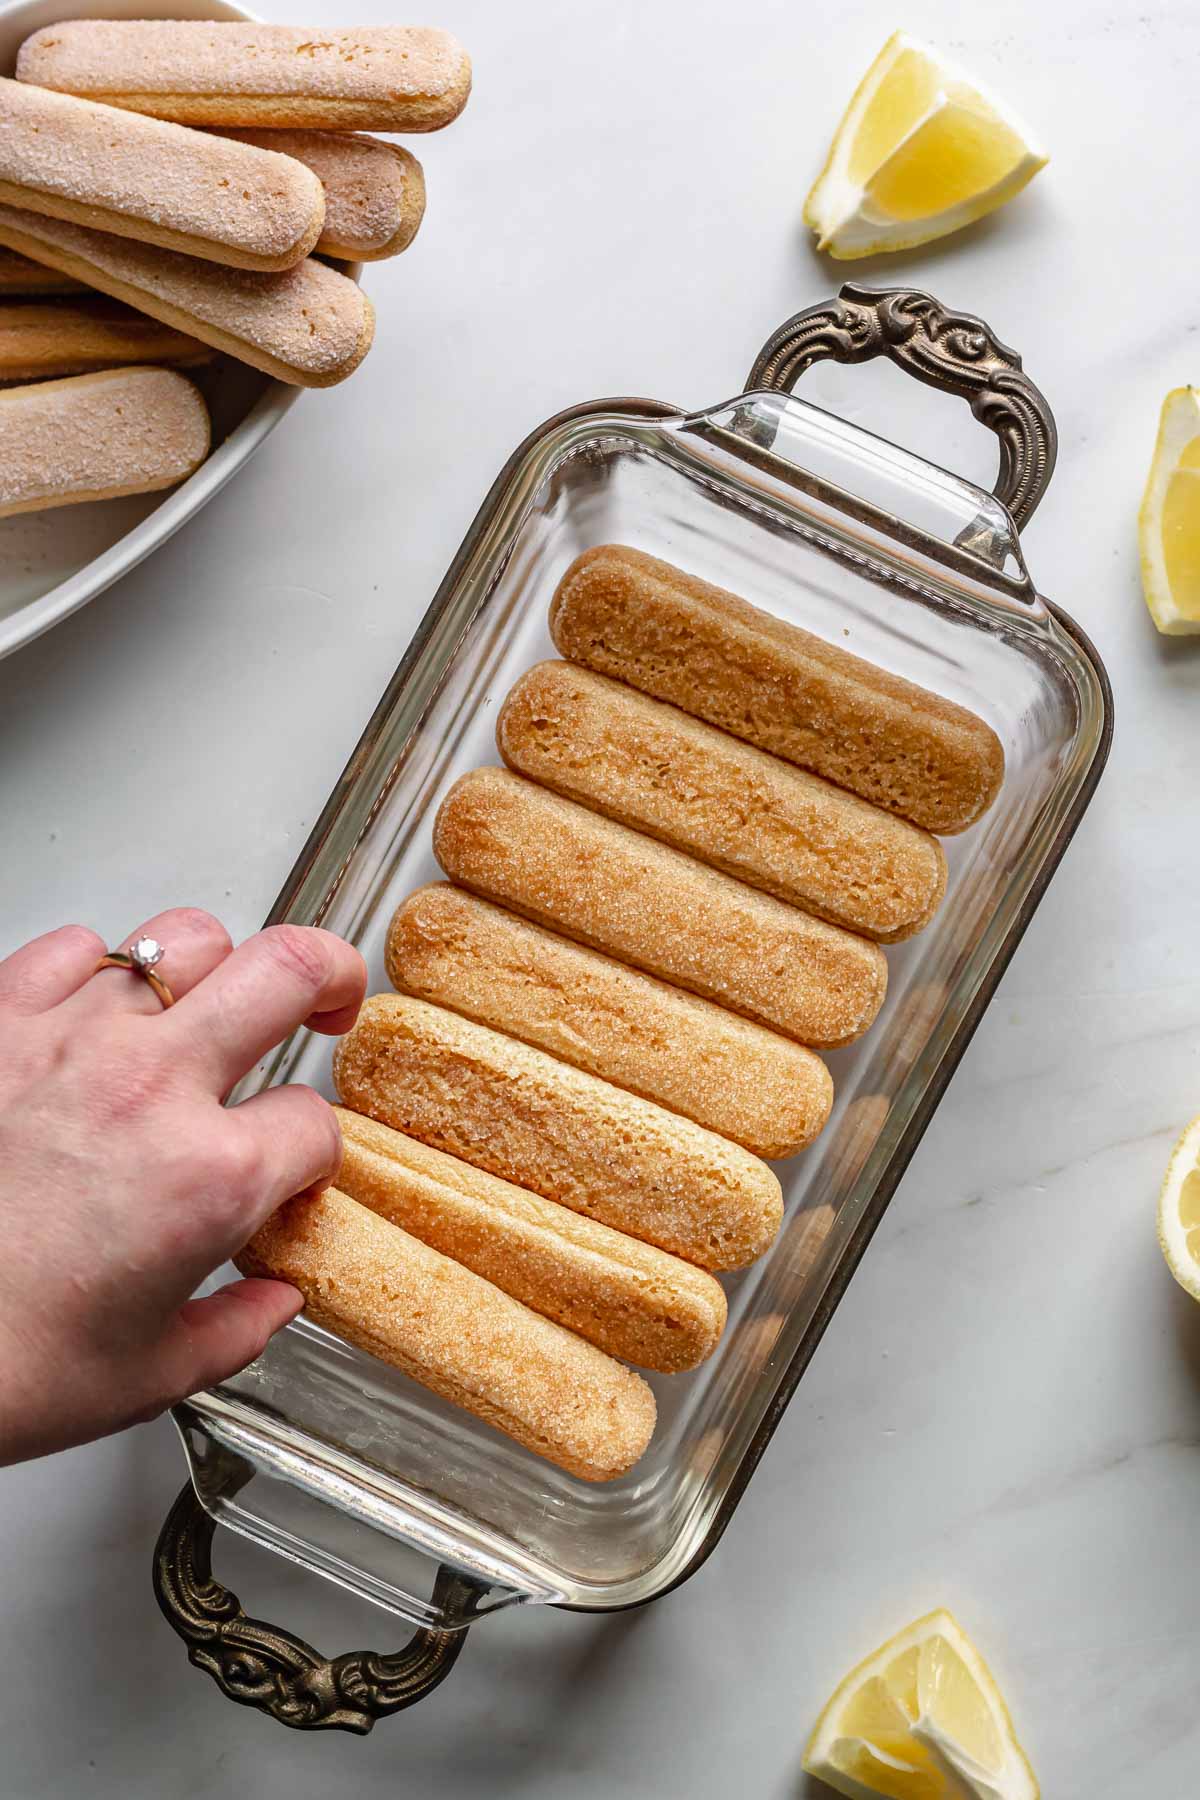 Layering lady fingers in the bottom of the loaf pan.